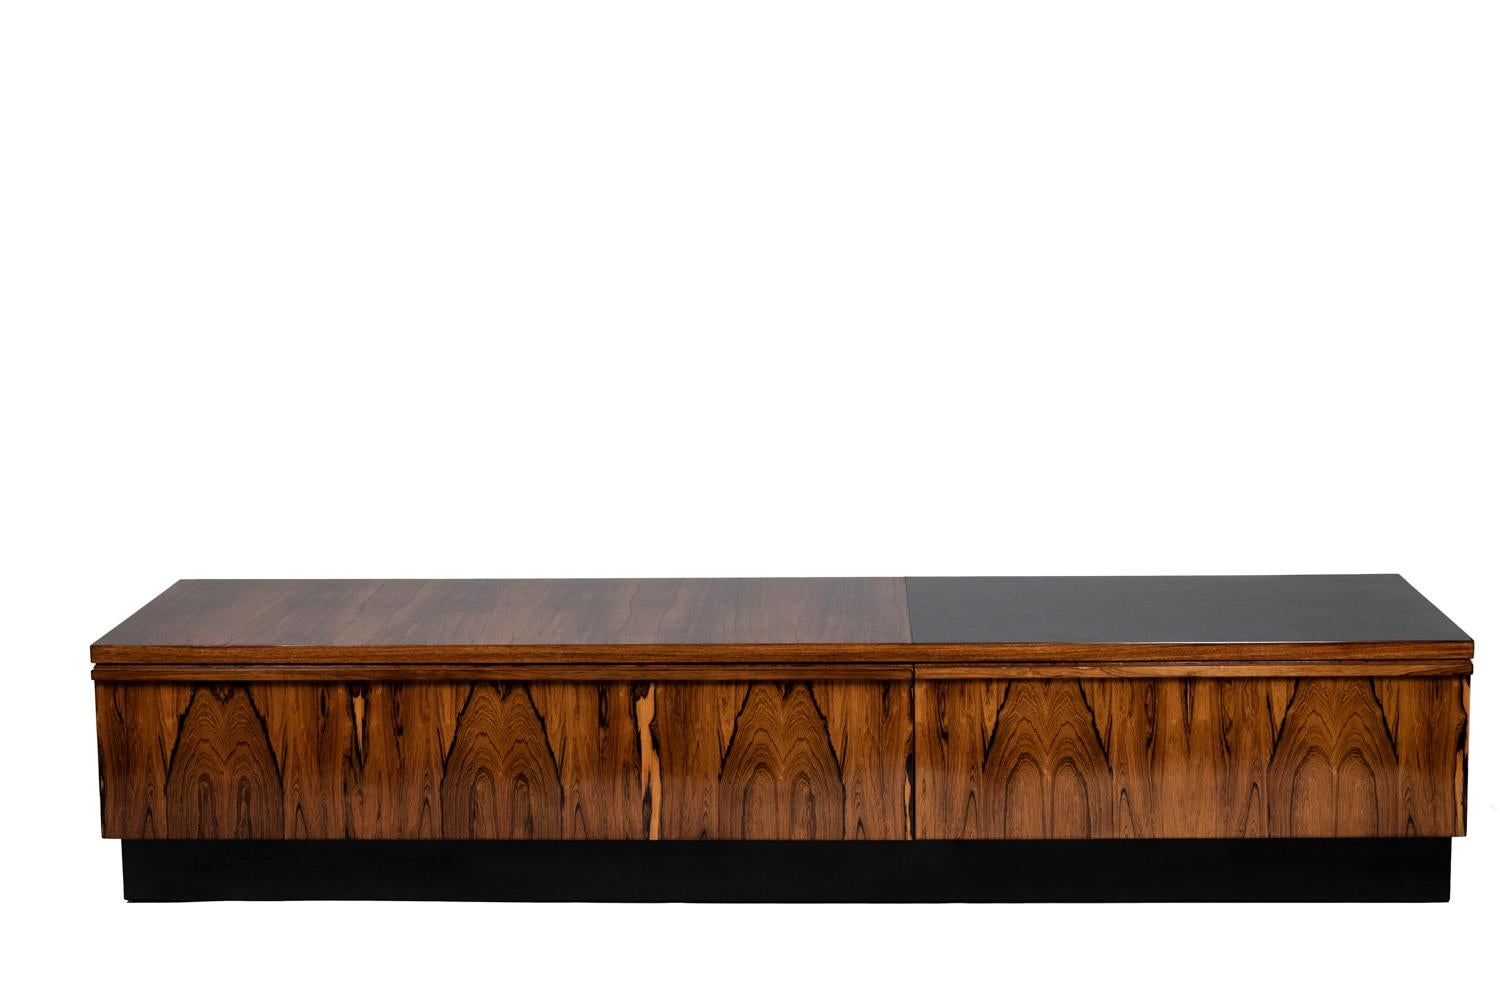 Low sideboard in Rio rosewood. Top partially covered with black laminate. Base of the sideboard in brushed aluminium.

Work realized in the 1970s.